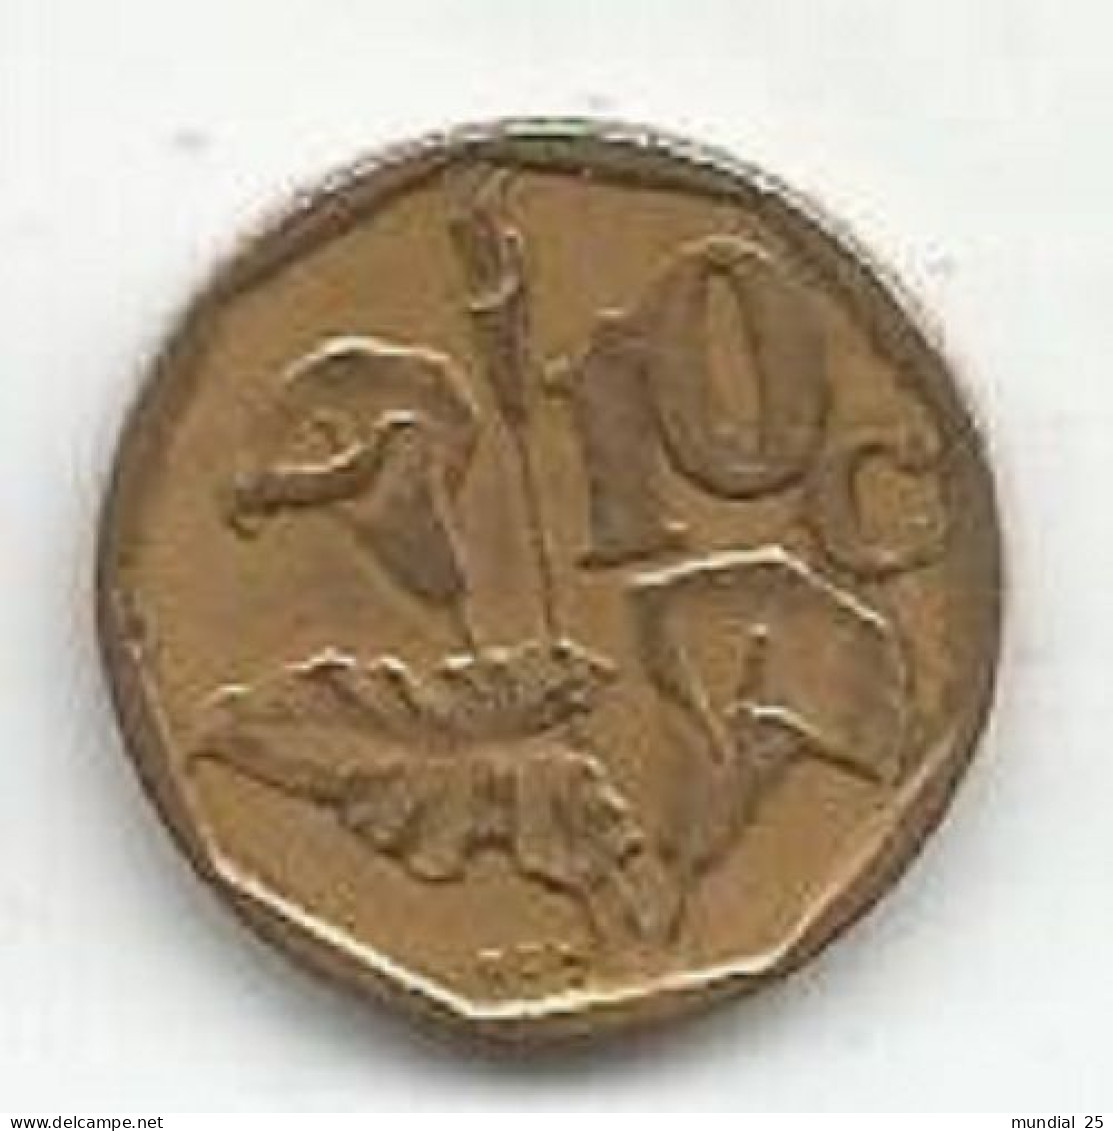 SOUTH AFRICA 10 CENTS 1992 - South Africa